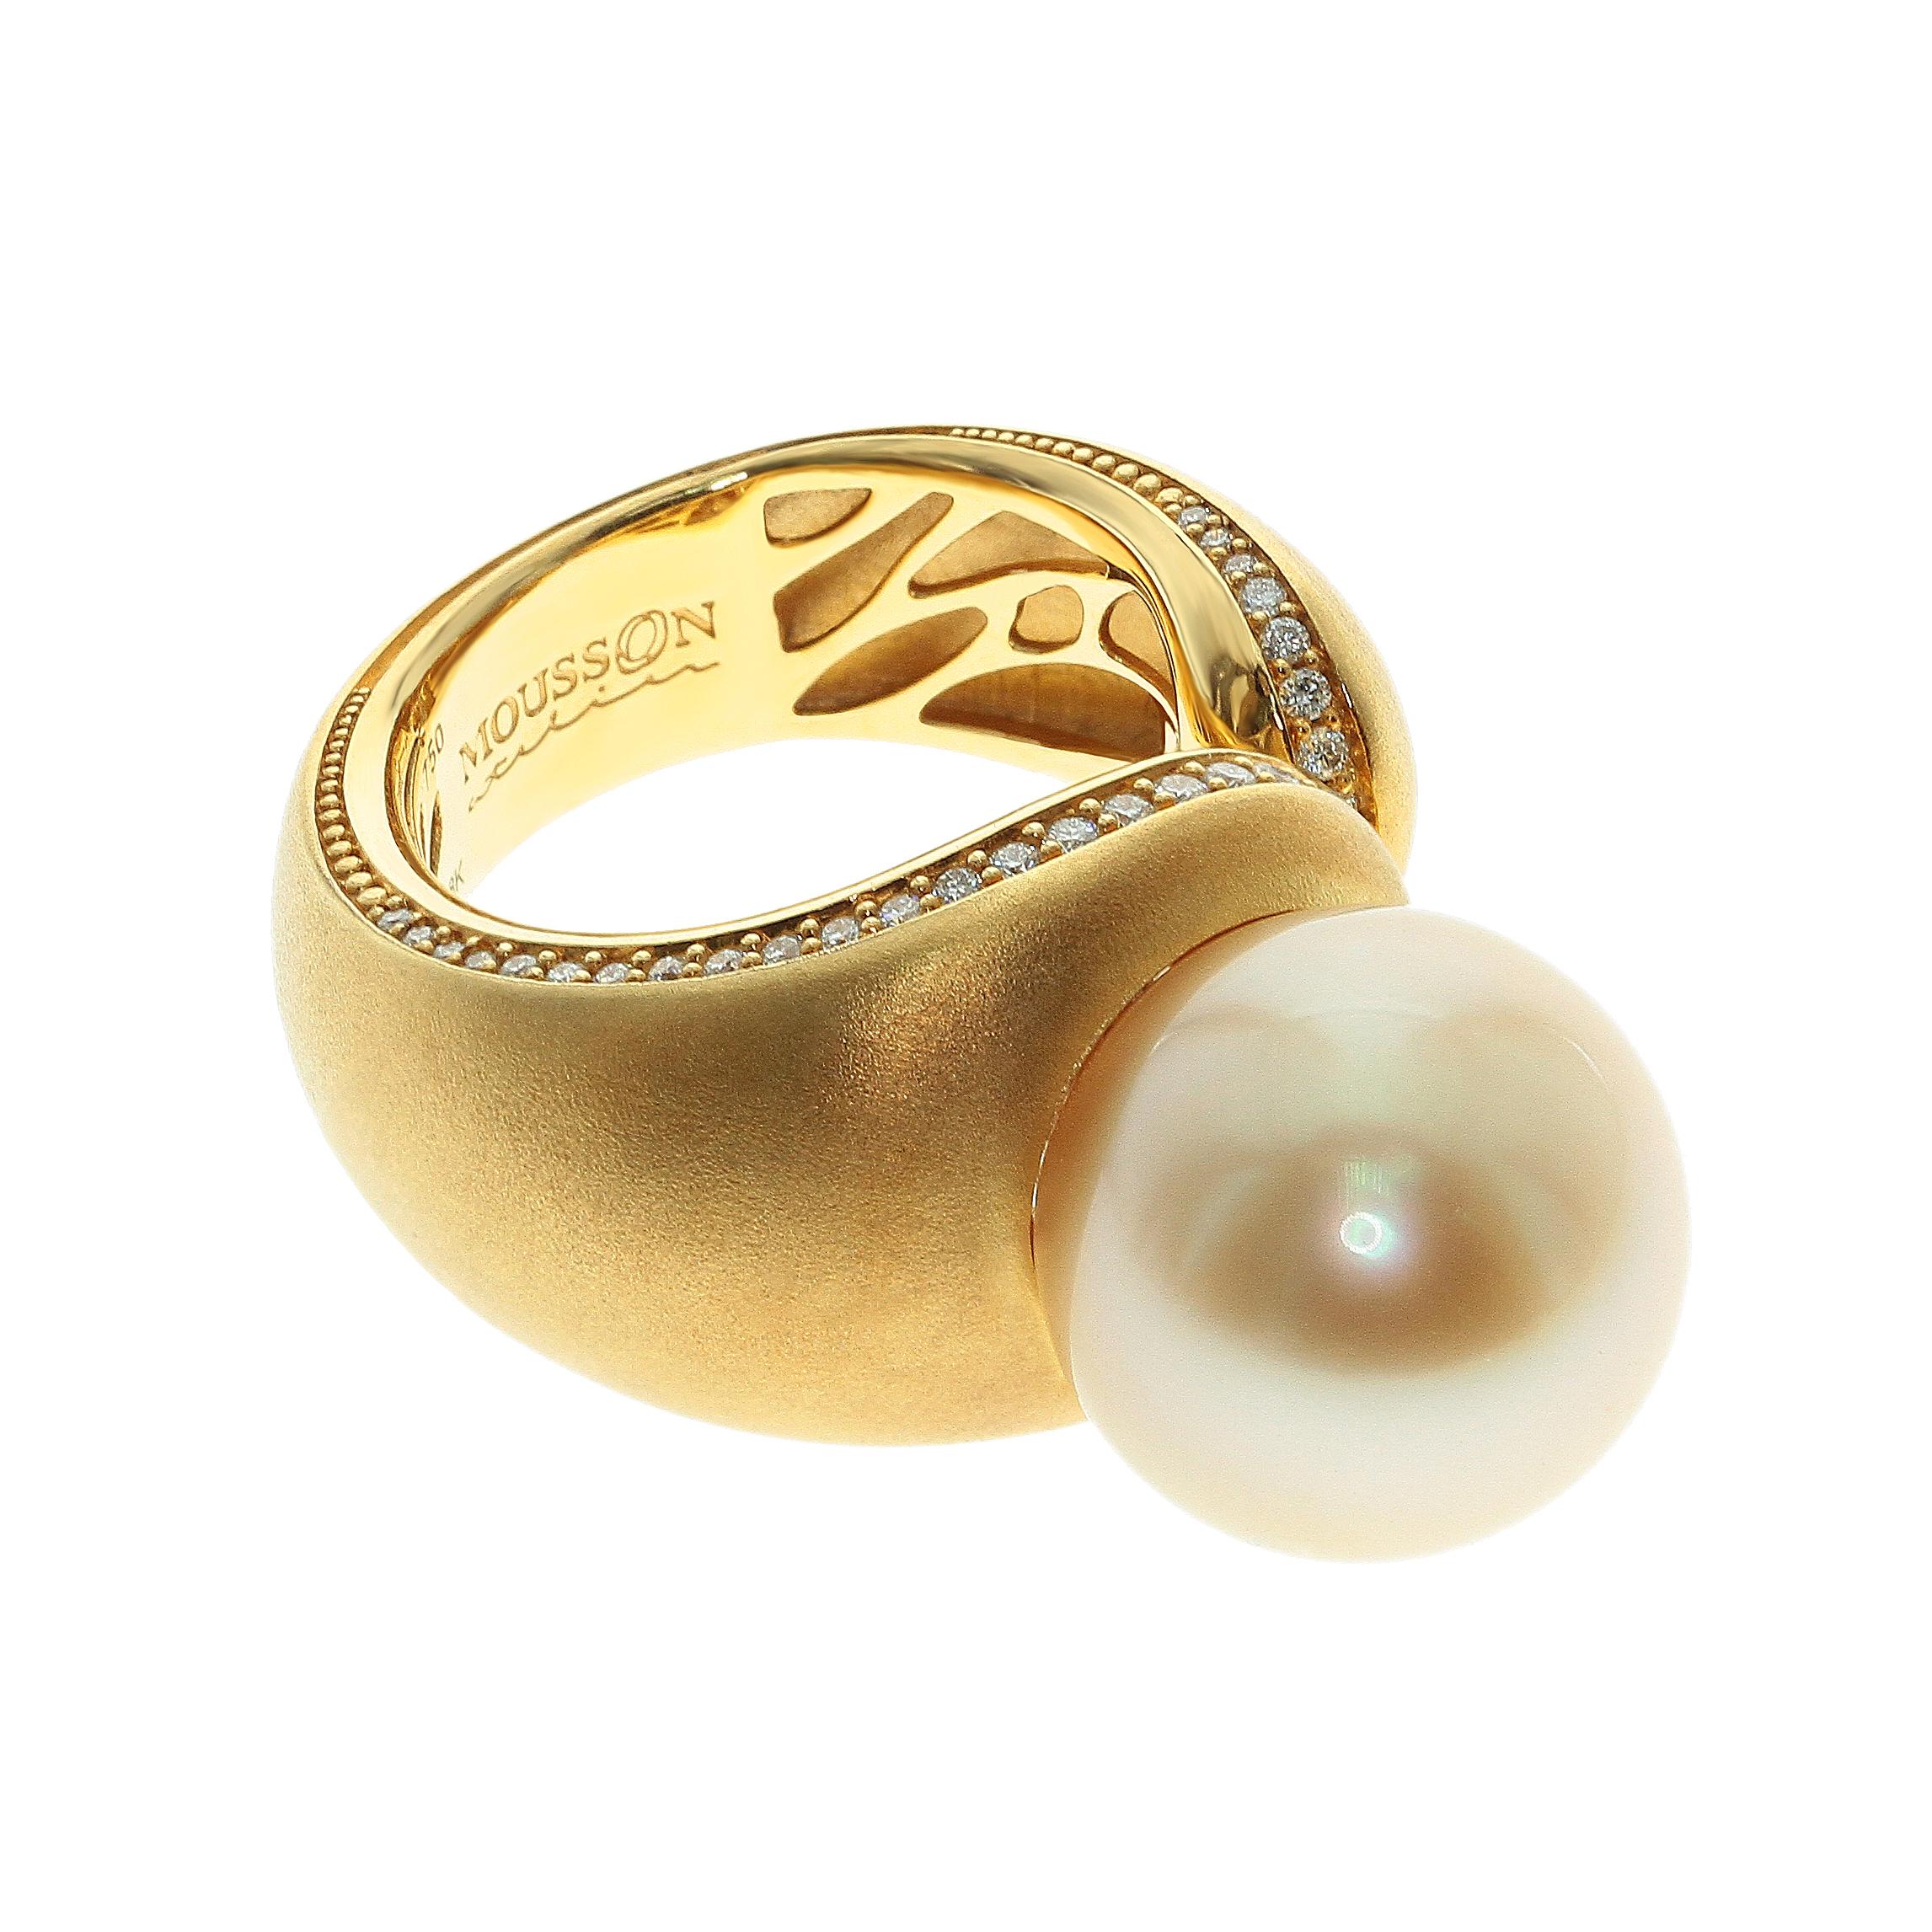 Golden South Sea Pearl Diamonds Cocktail Ring
Very comfortable Ring. Smooth design in combine with a smooth surface of a pearl gives perfect result. Brown diamonds carefully selected to support the pearl color. Pure triumph of Golden!!!
Please